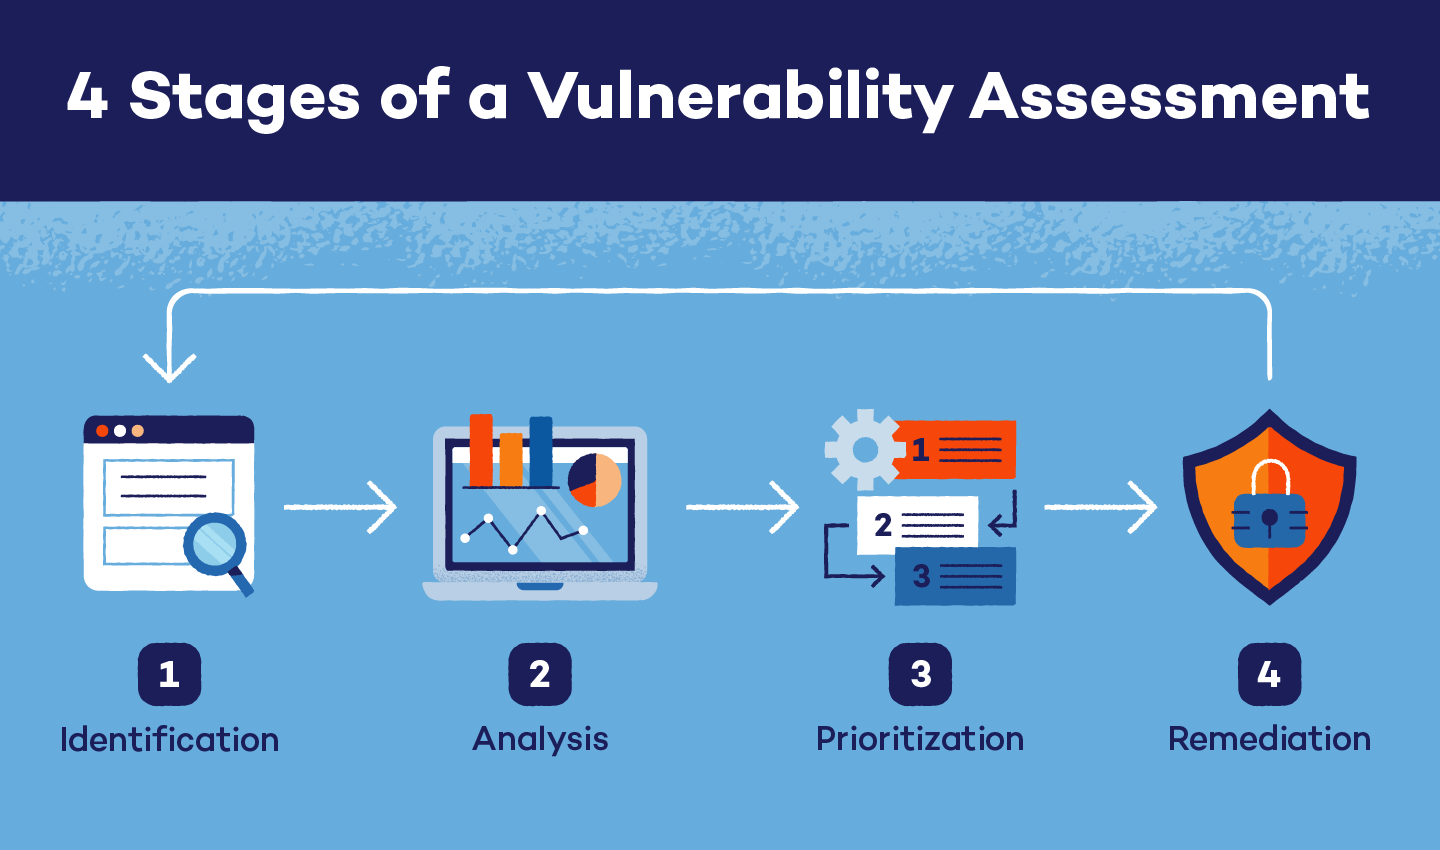 Illustration of the 4 stages of a vulnerability assessment.